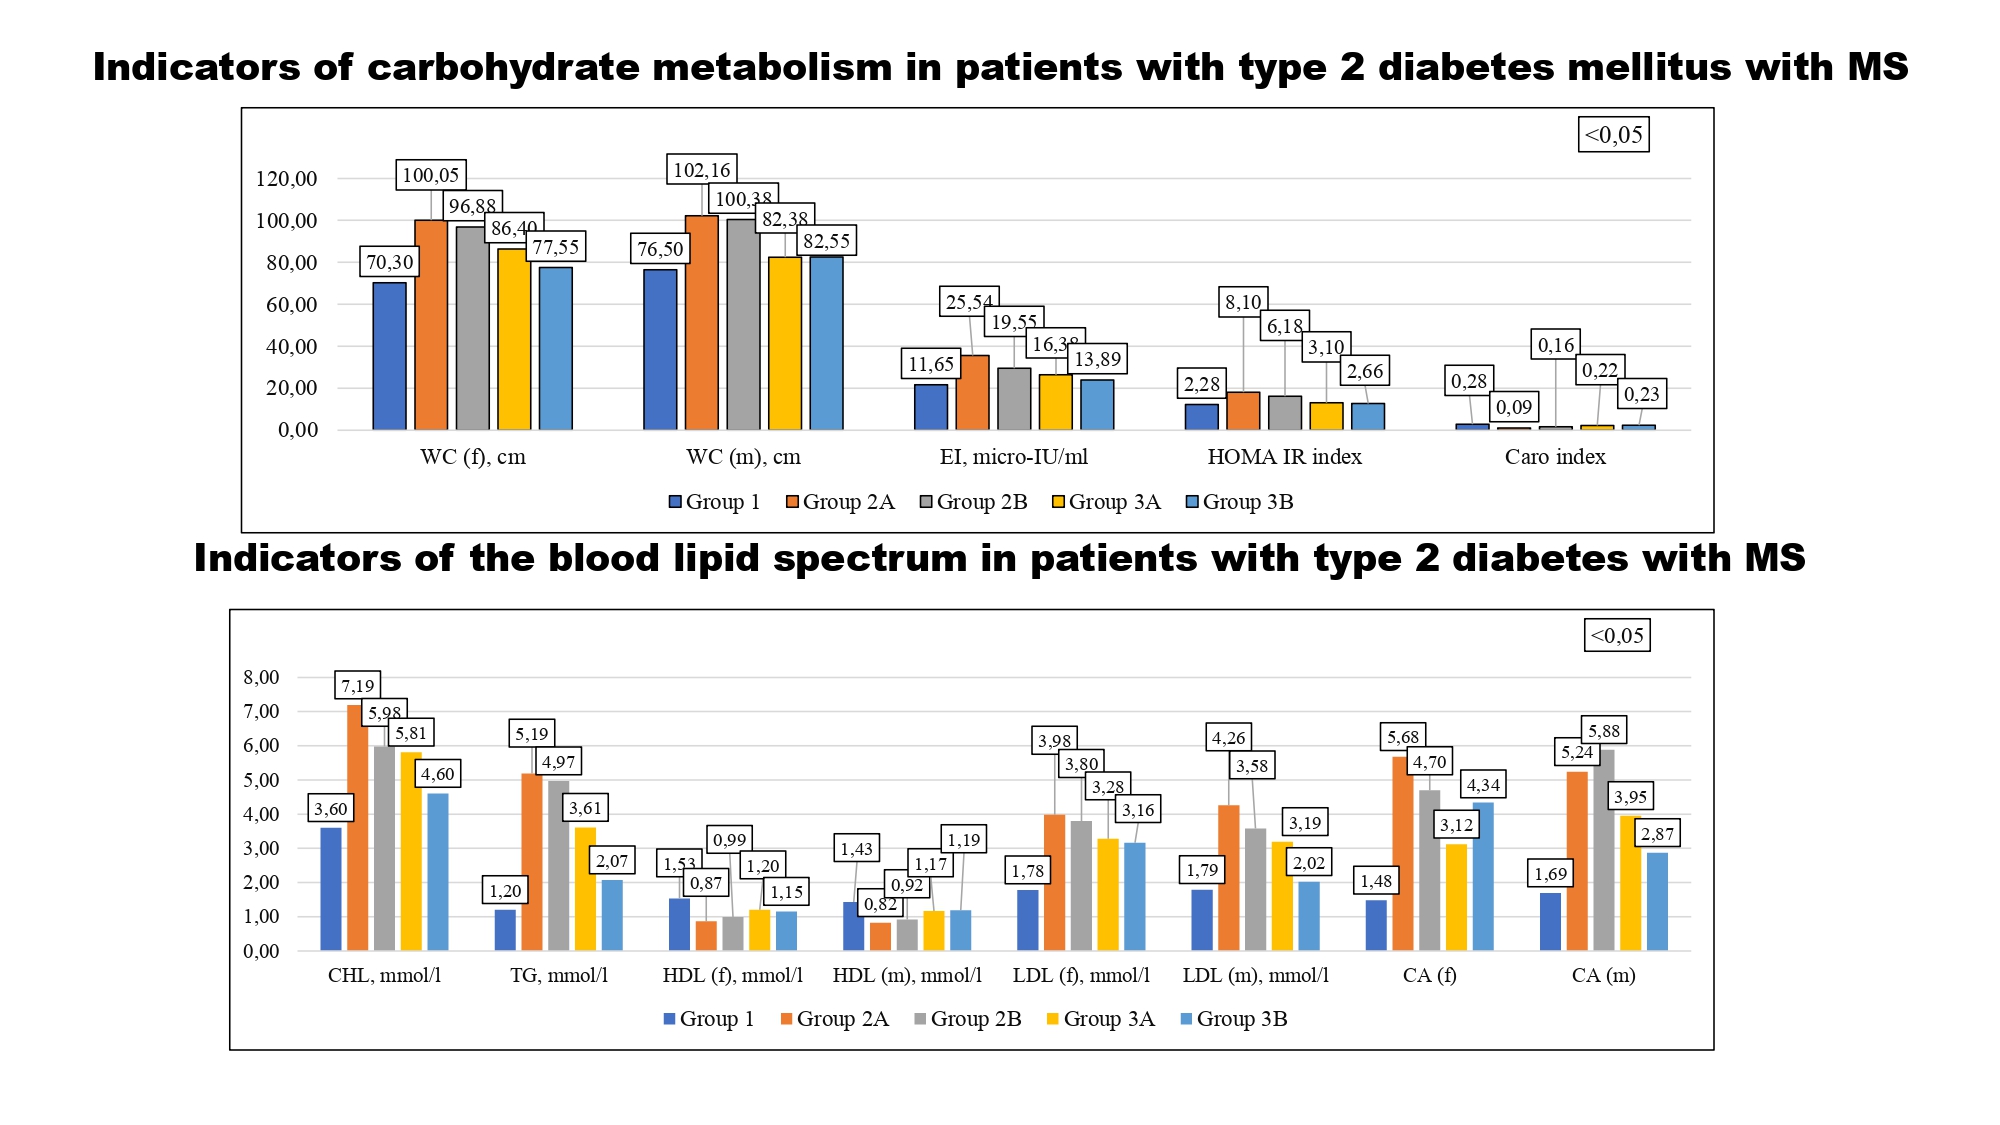 The relationship of dyslipidemia and insulin resistance in patients with type 2 diabetes and the metabolic syndrome